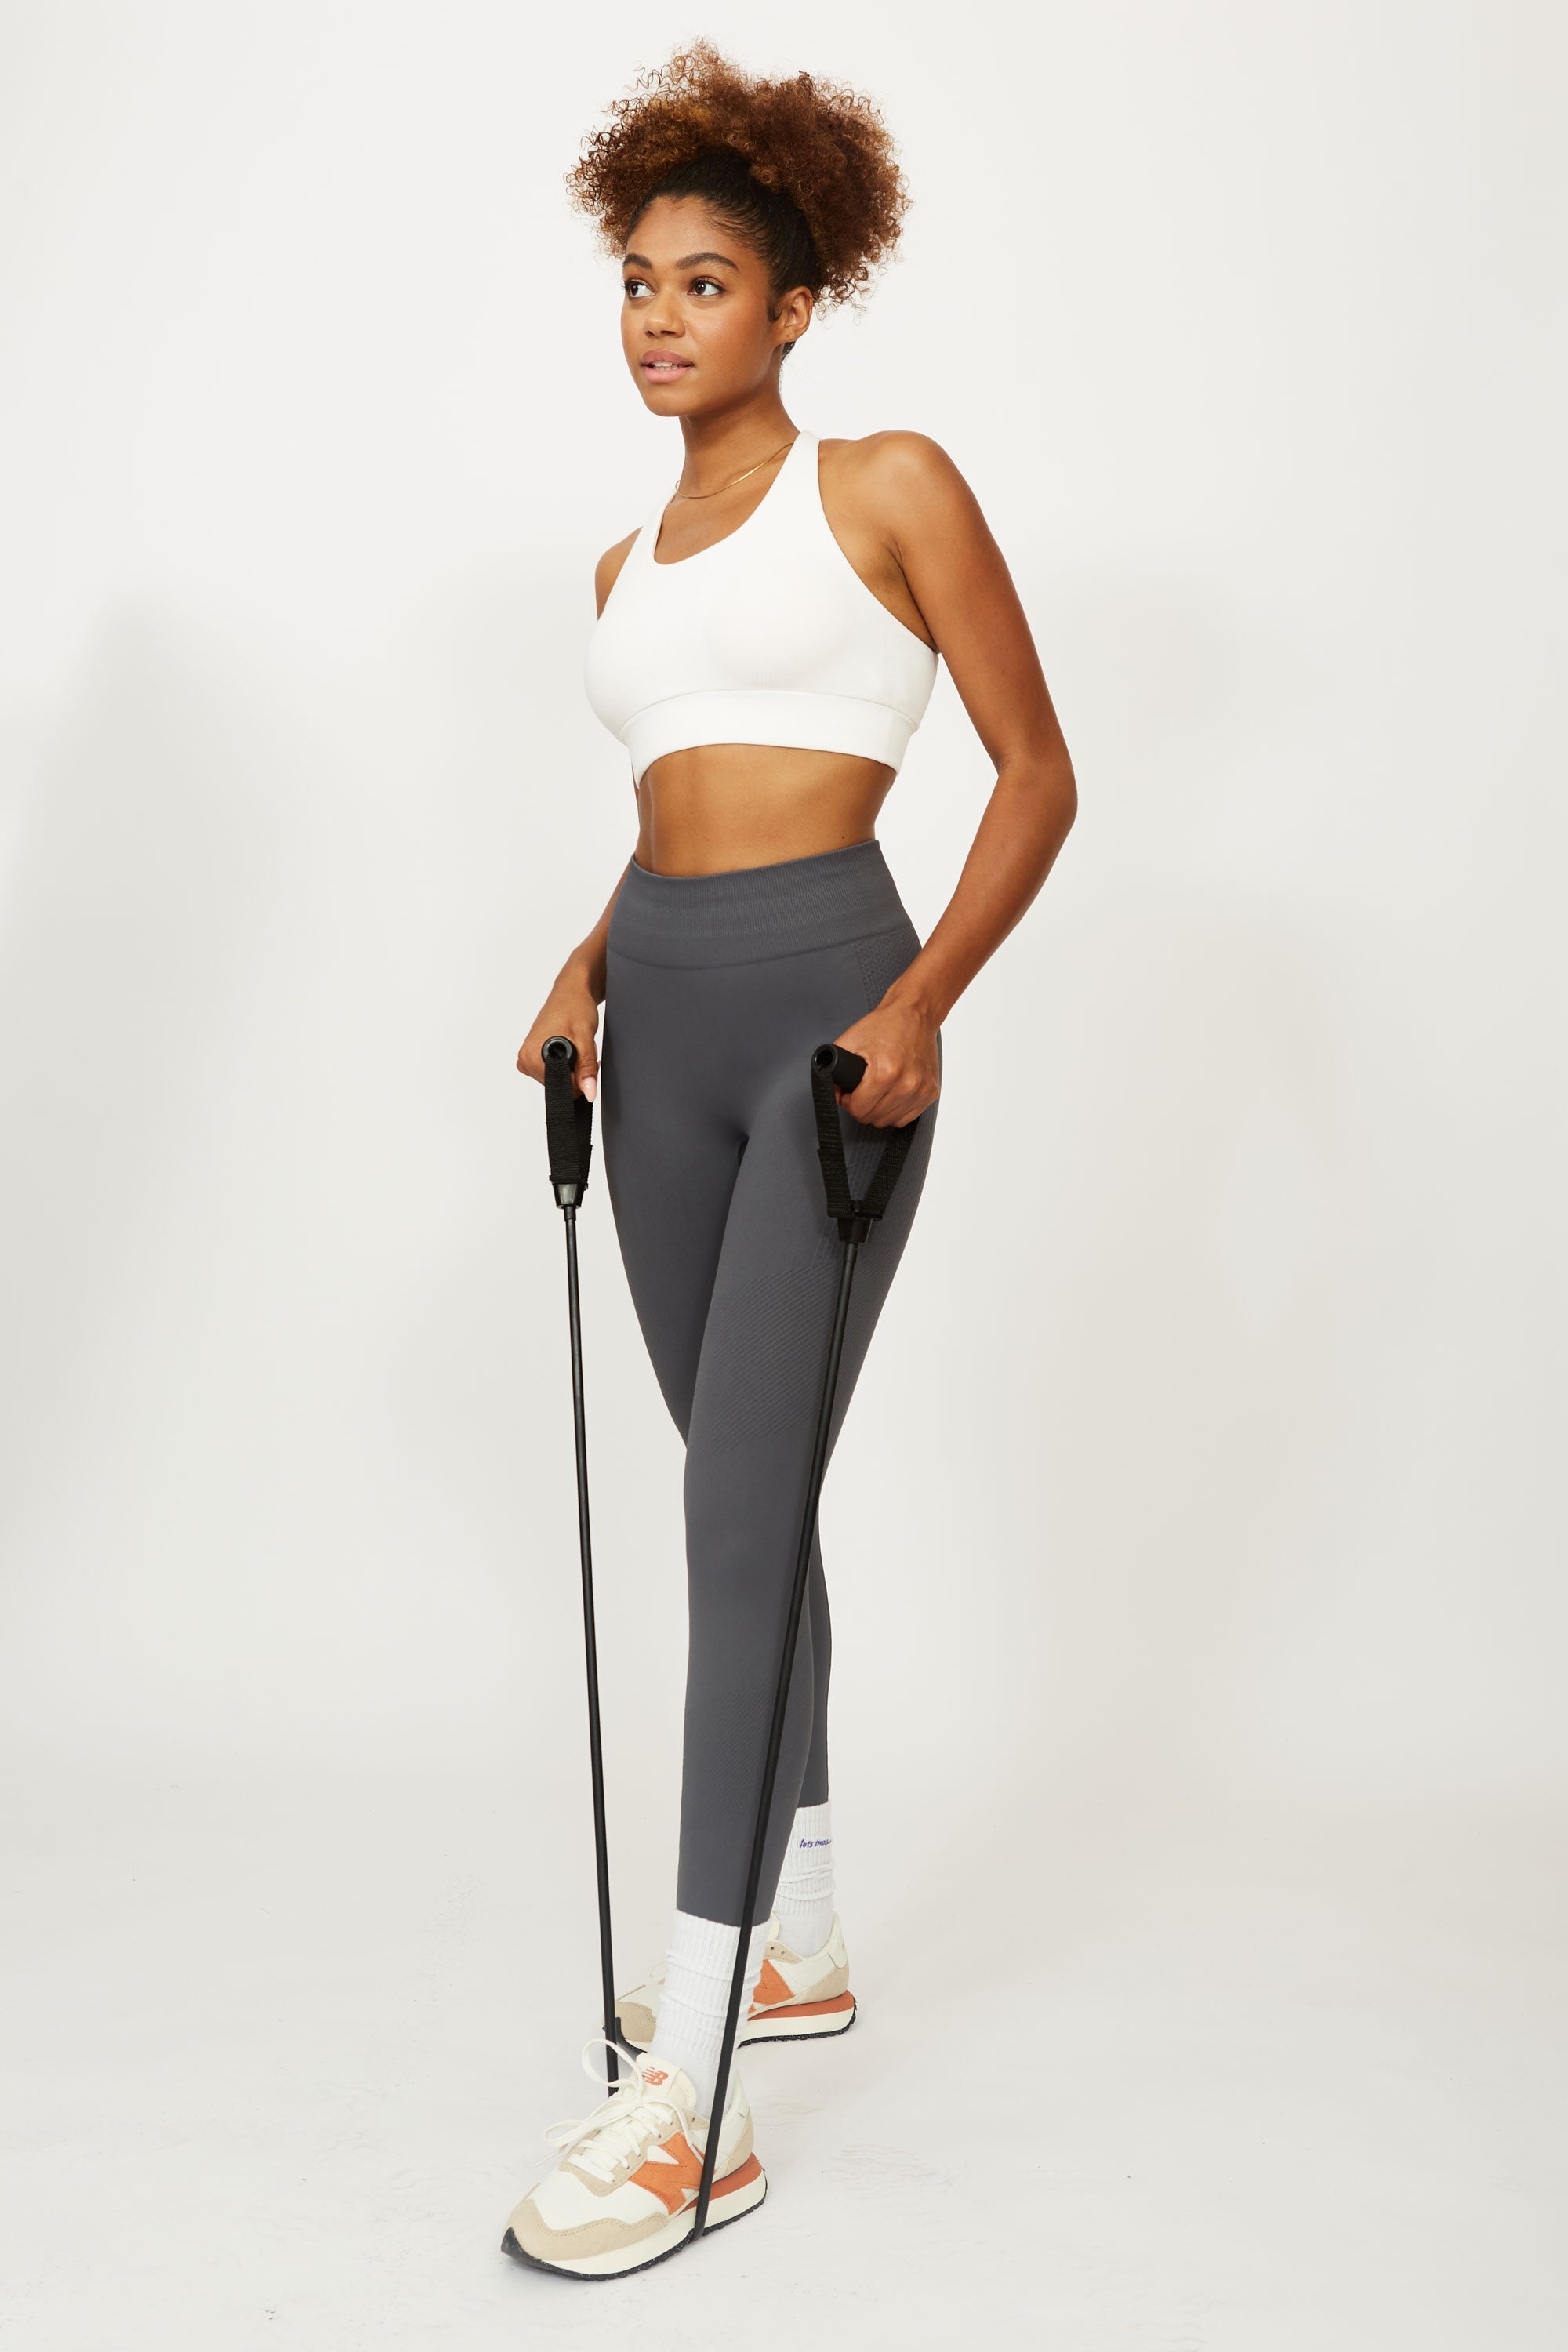 Model wearing grey leggings and white supportive sports bra for sustainable activewear brand, Jilla.